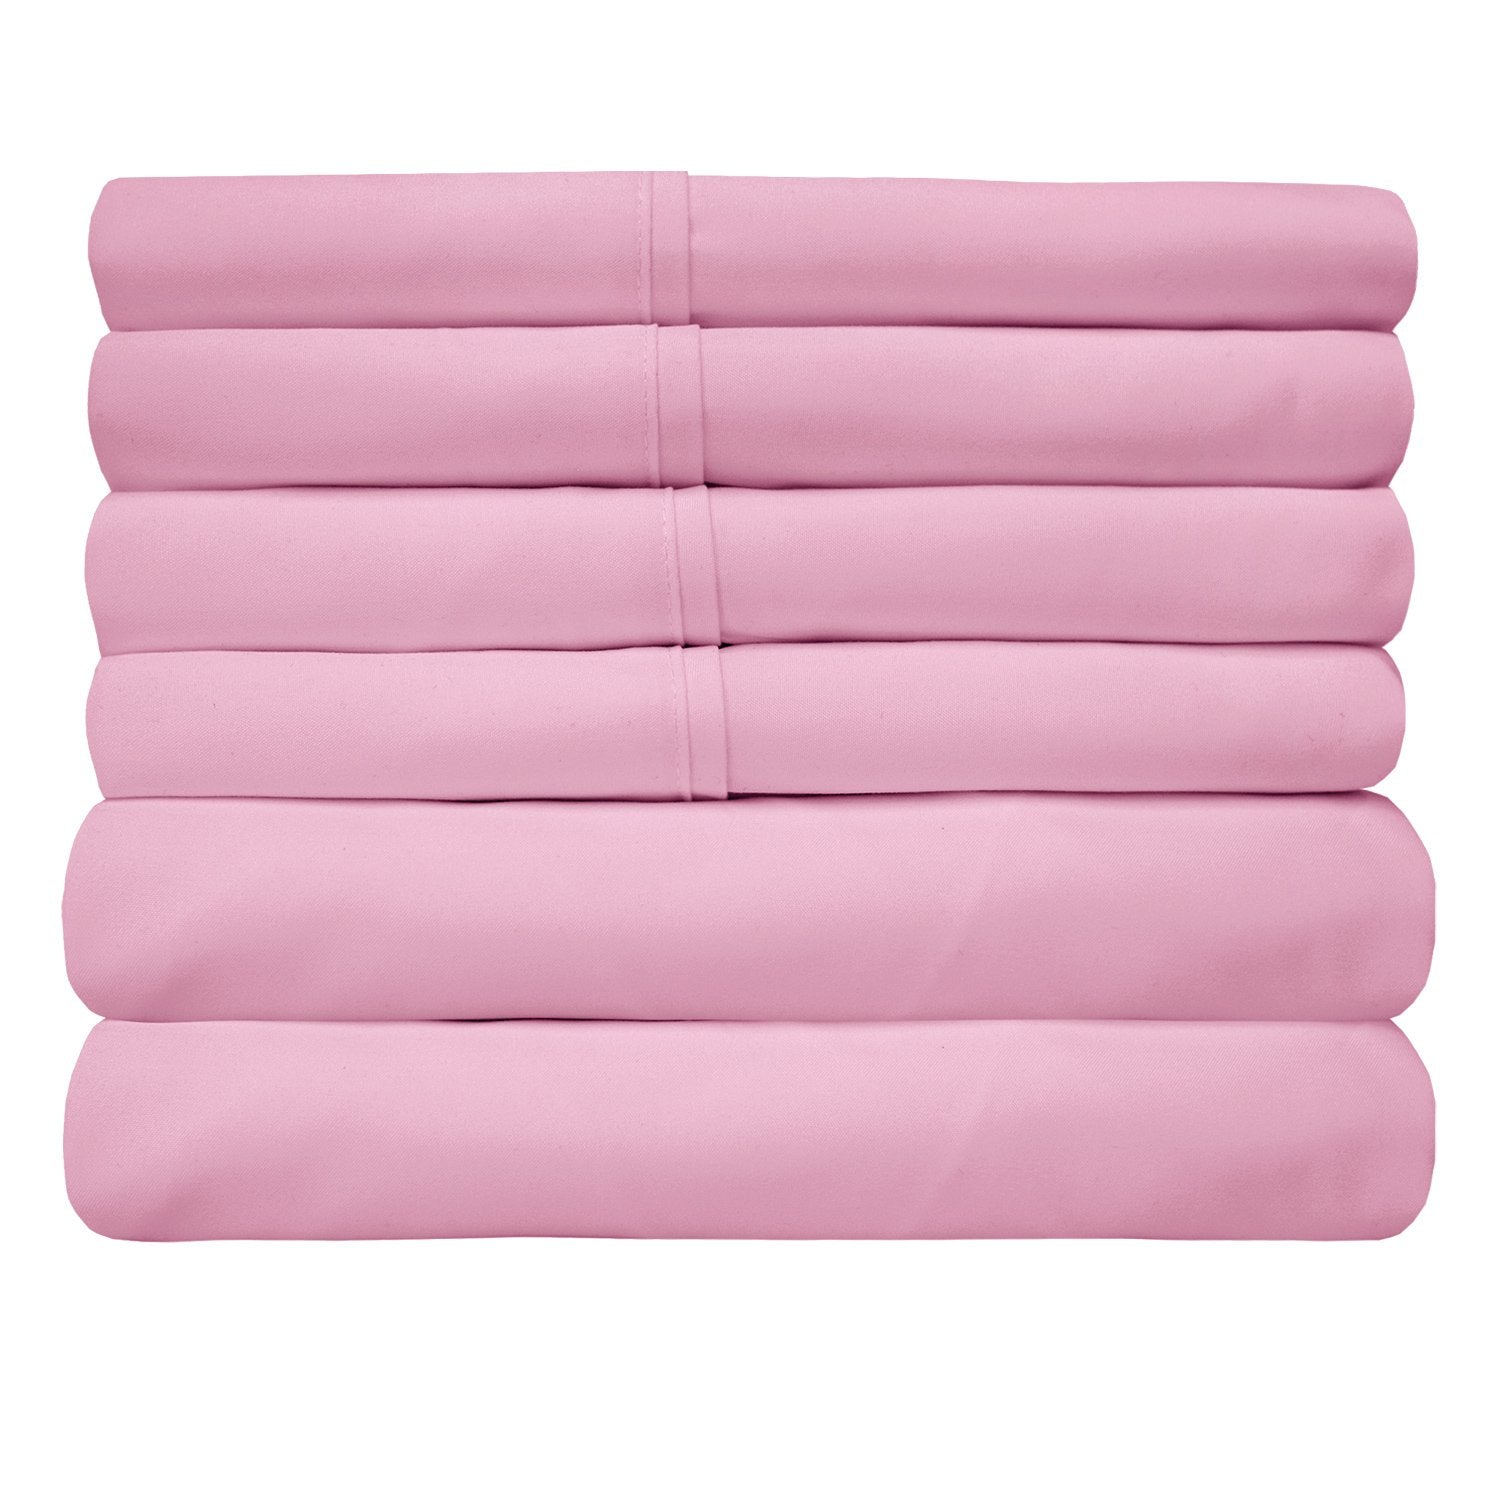 Deluxe 6-Piece Bed Sheet Set (Pink) - Folded 2